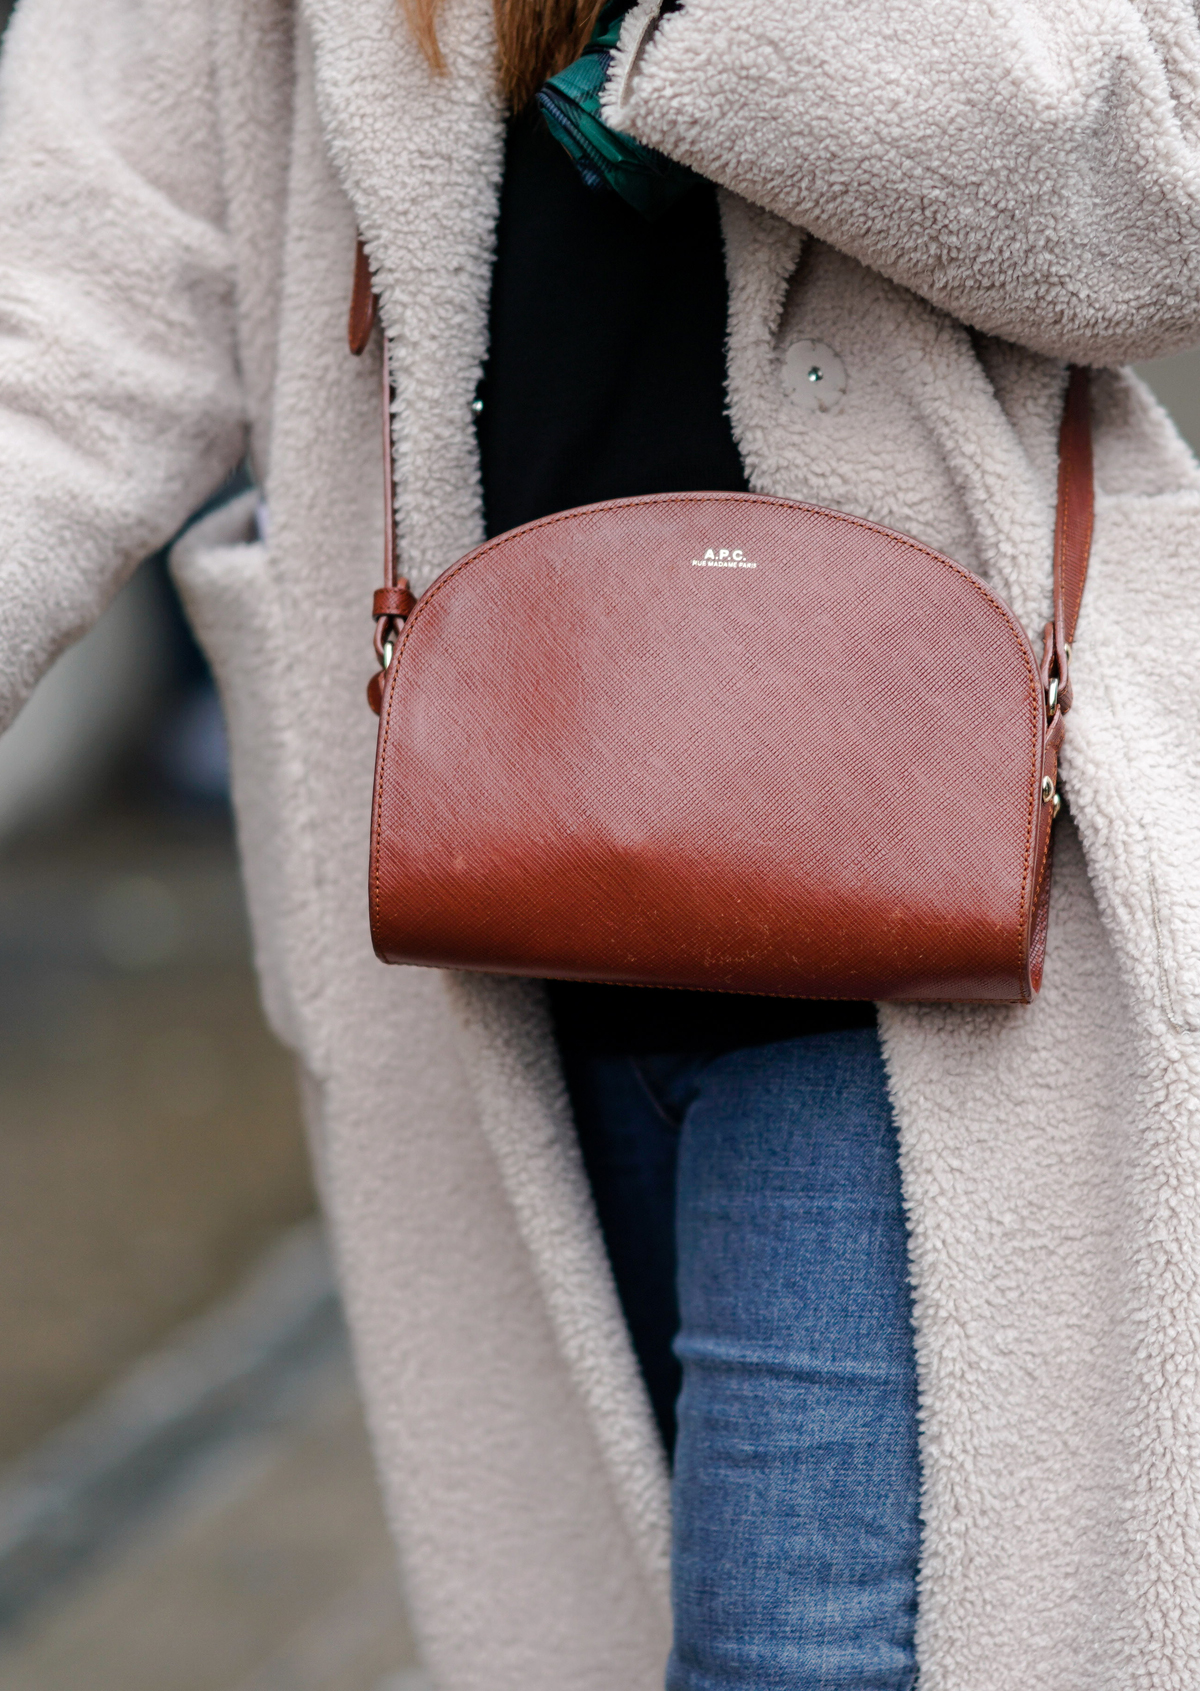 9 Classic Bags That Will Always Eclipse the Trends